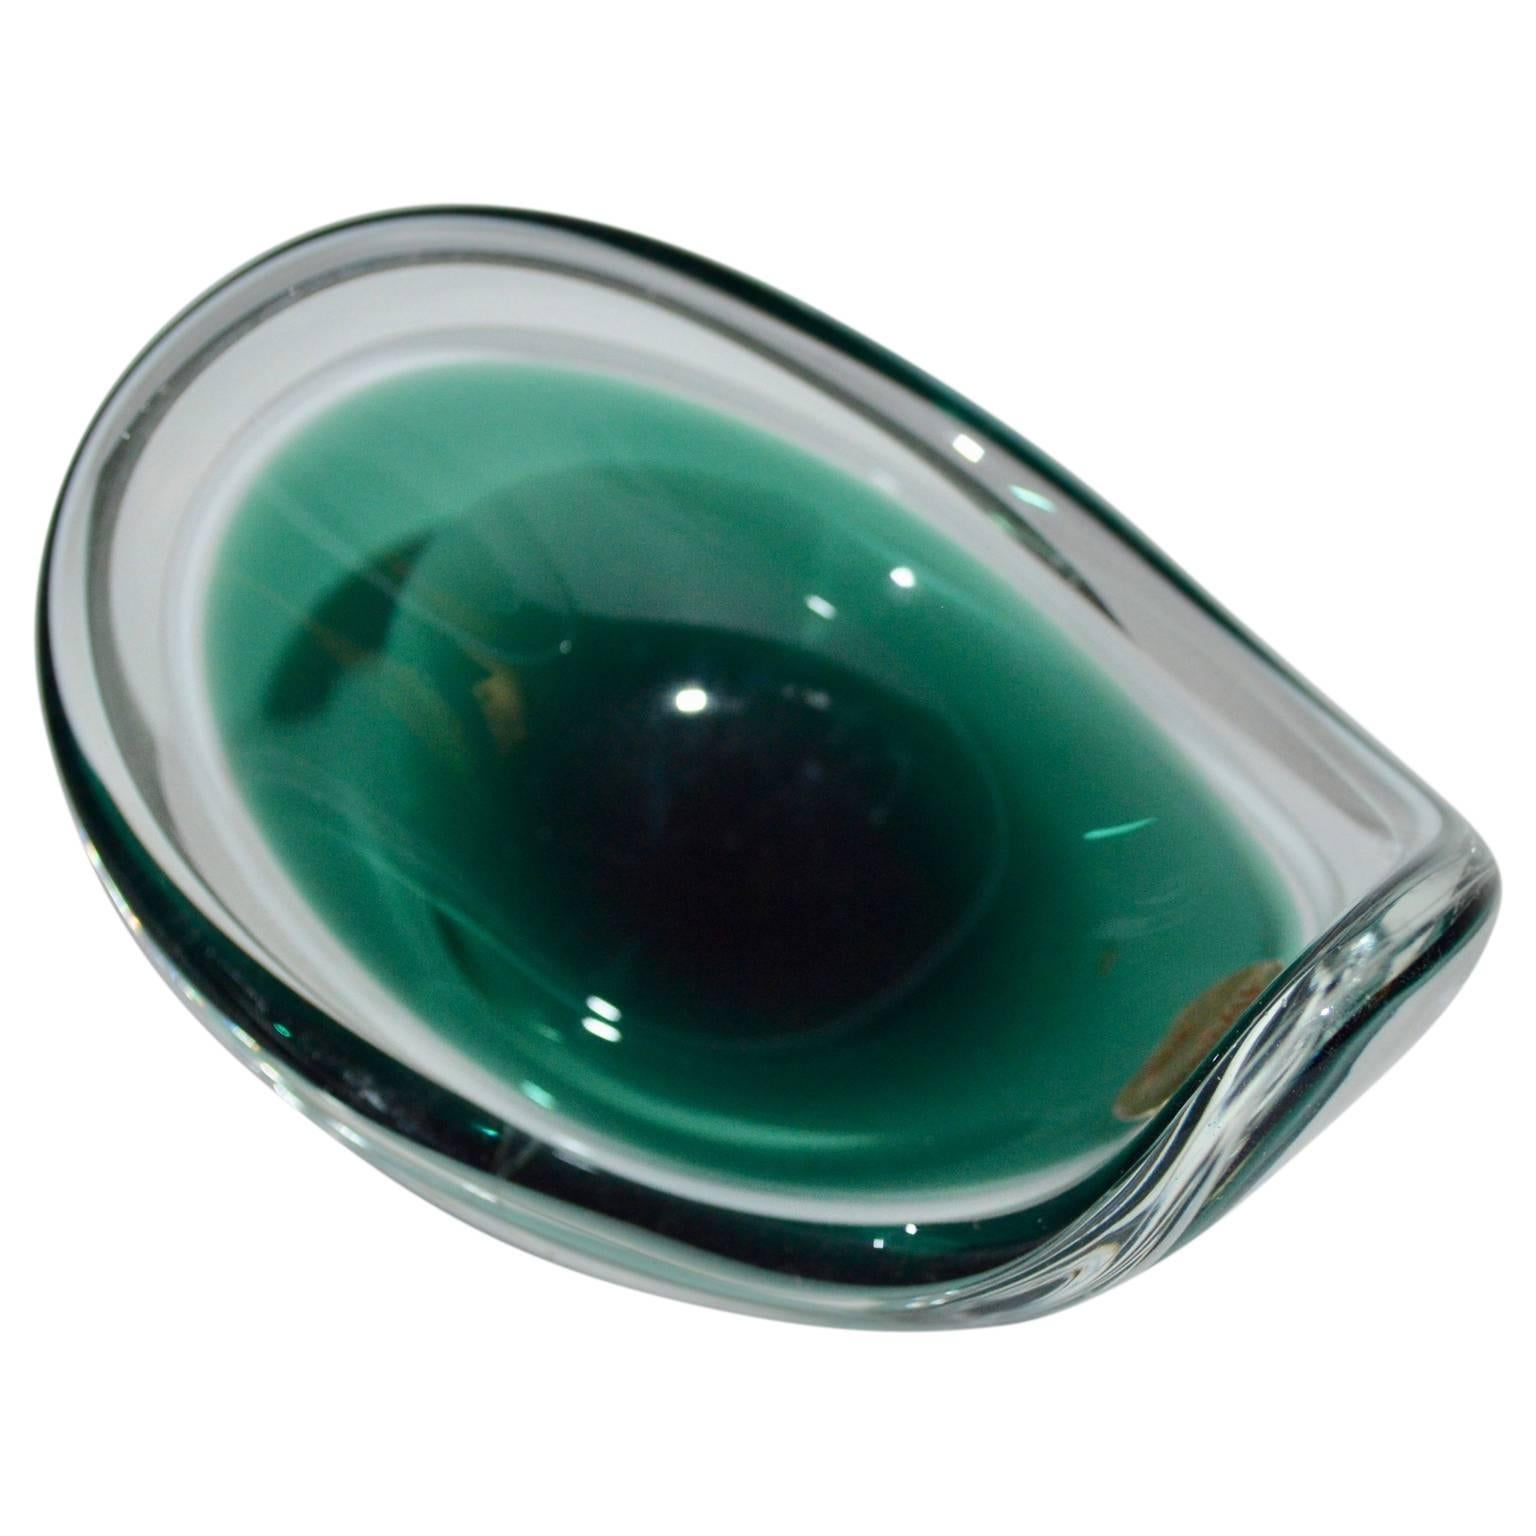 Midcentury Small Green Flygfors Trincket or Ashtray In Good Condition For Sale In Copenhagen, K